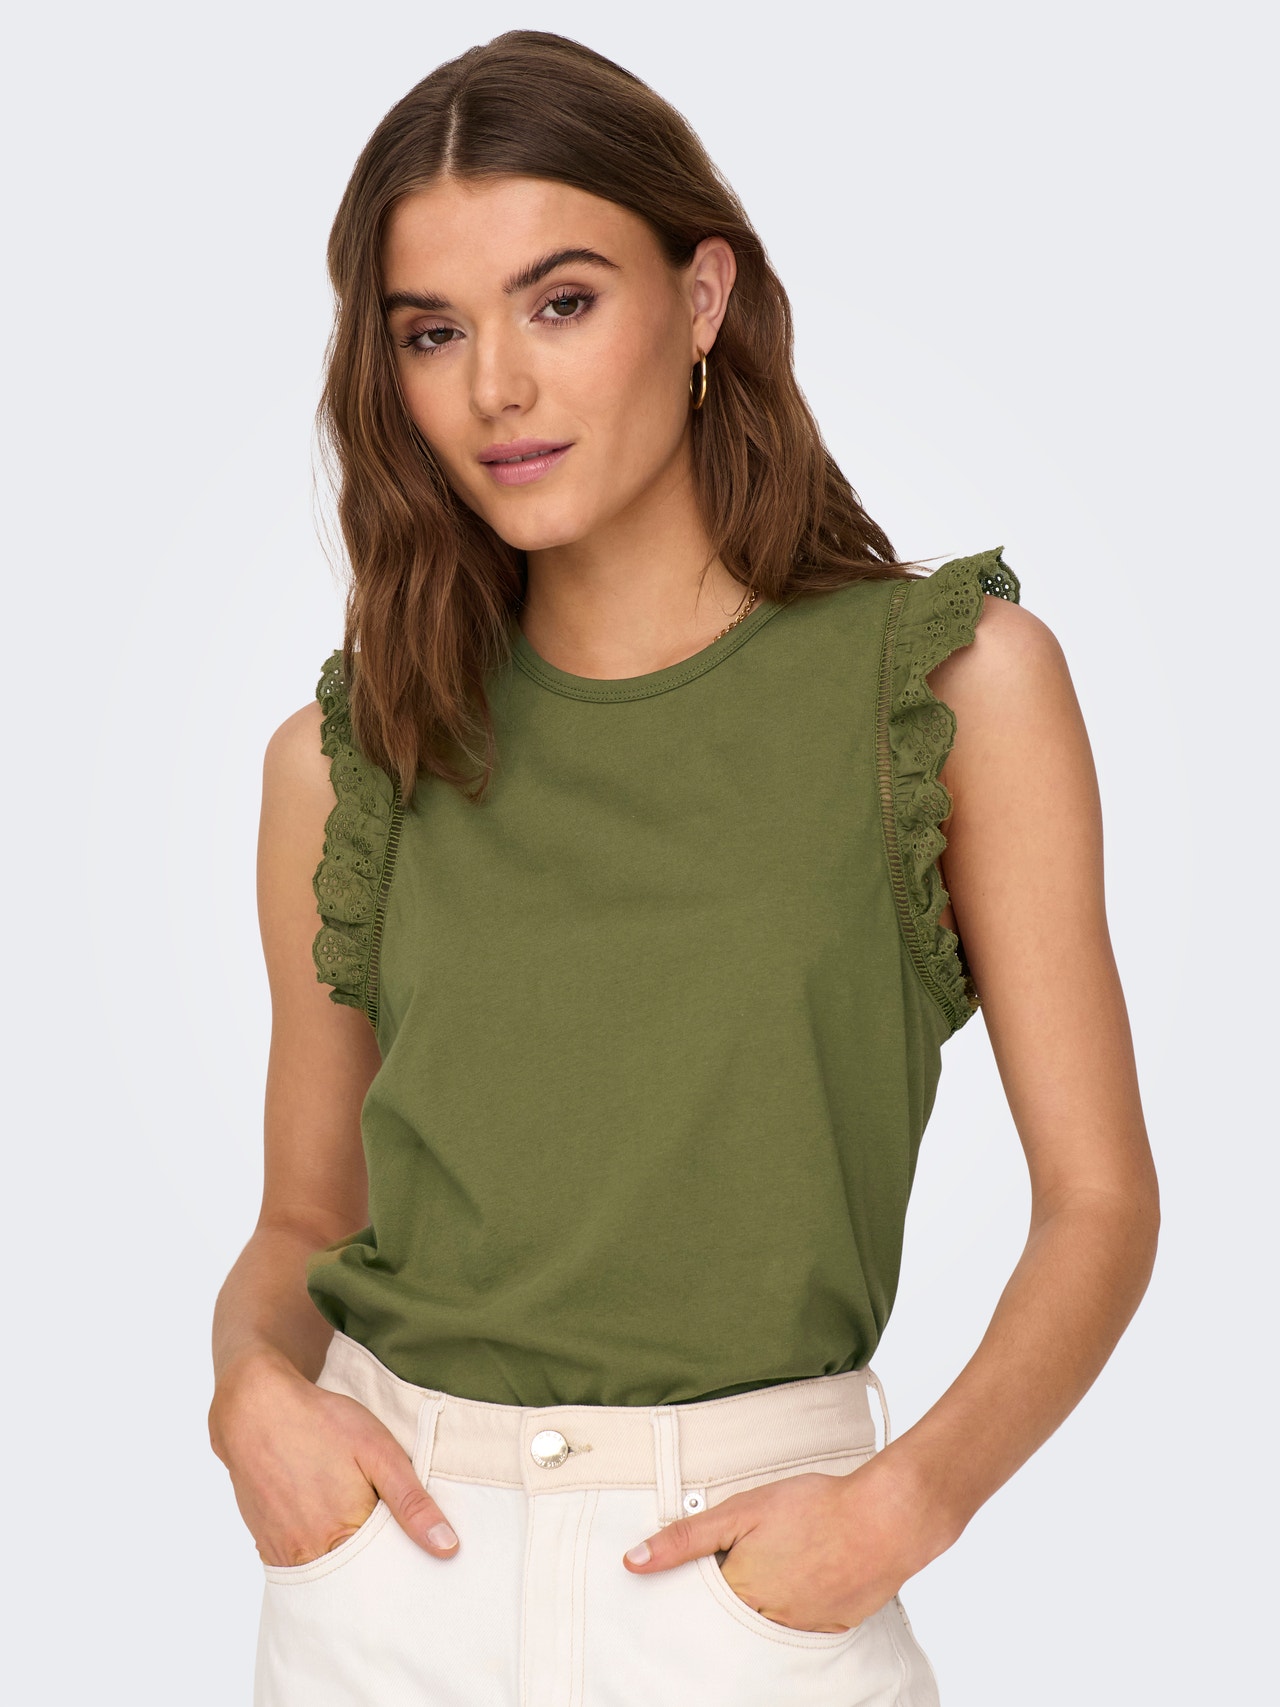 ONLY Top With Ruffle Sleeves -Martini Olive - 15289579